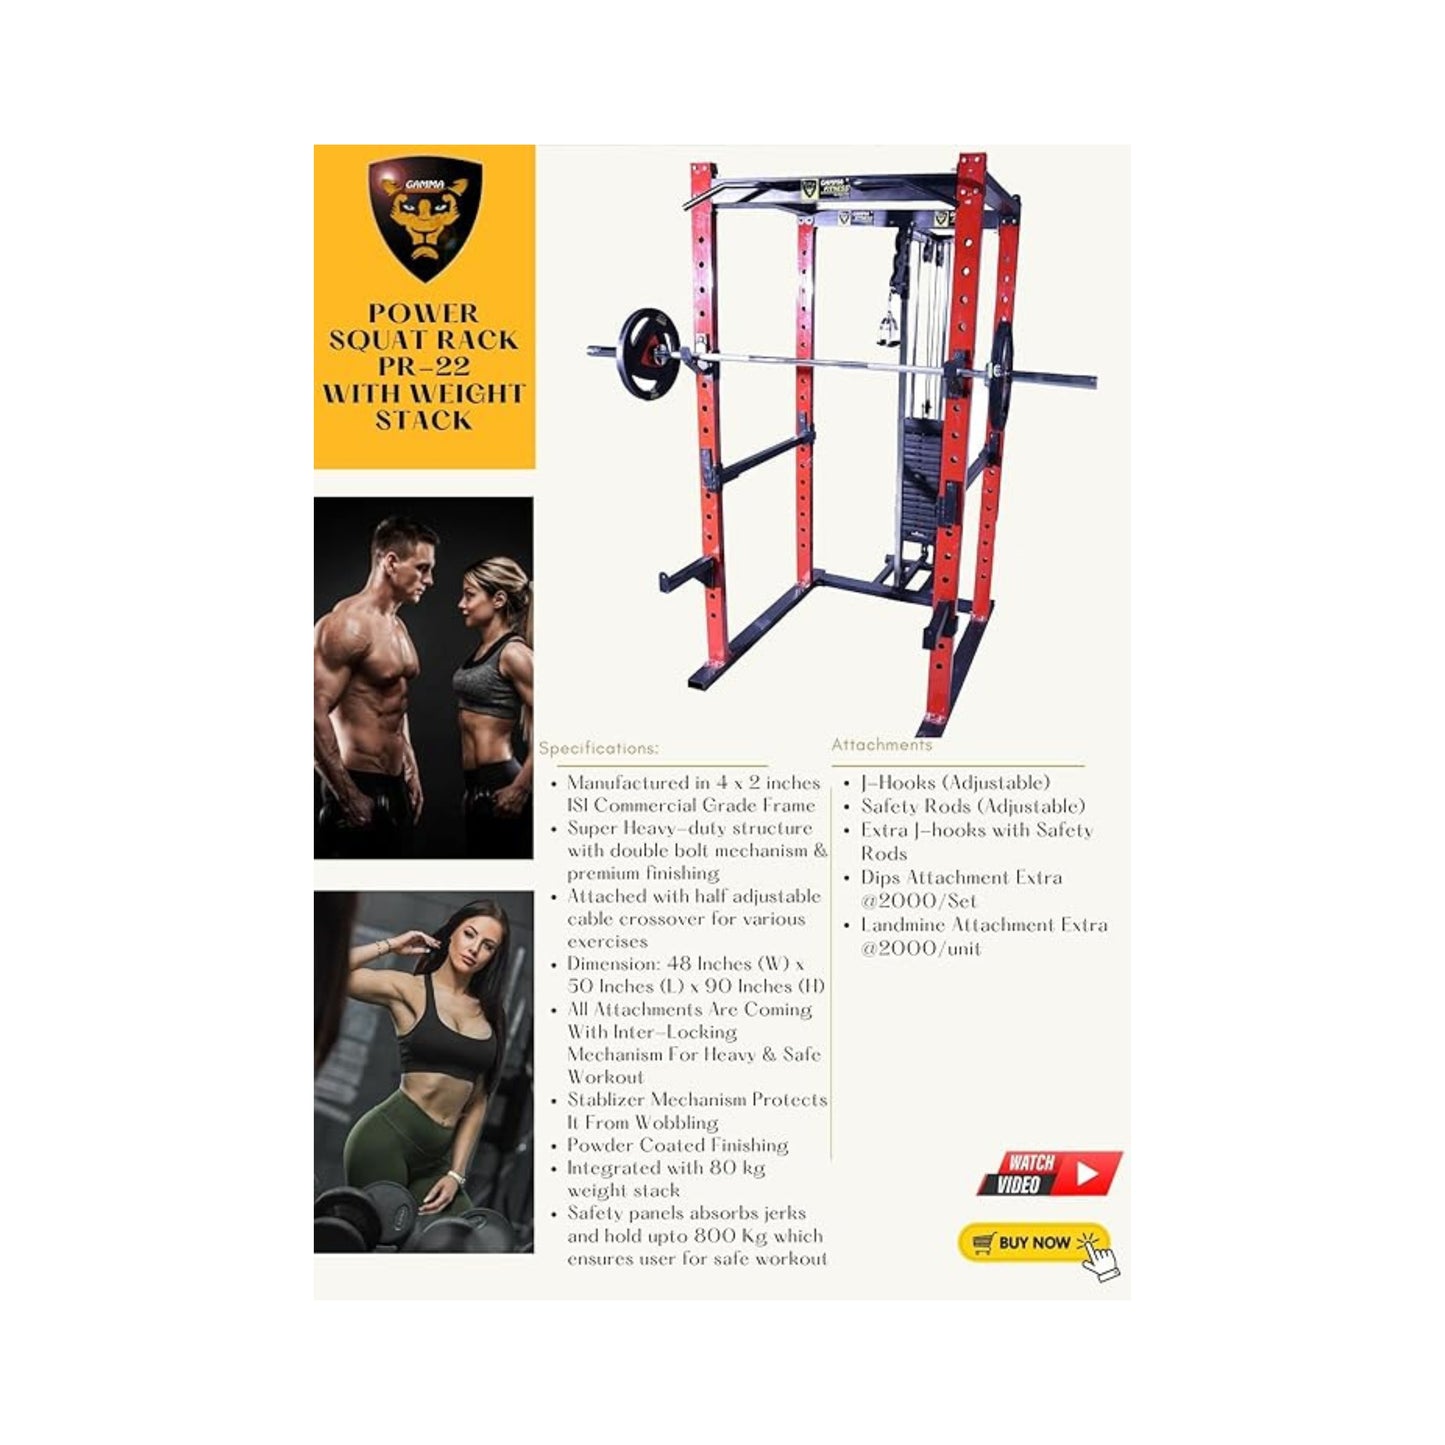 GAMMA FITNESS Power Squat Rack with Cable Crossover, Lats Pull Down and Rowing PR-22 in 4 x 2 inches Commercial Frame with Weight Stack